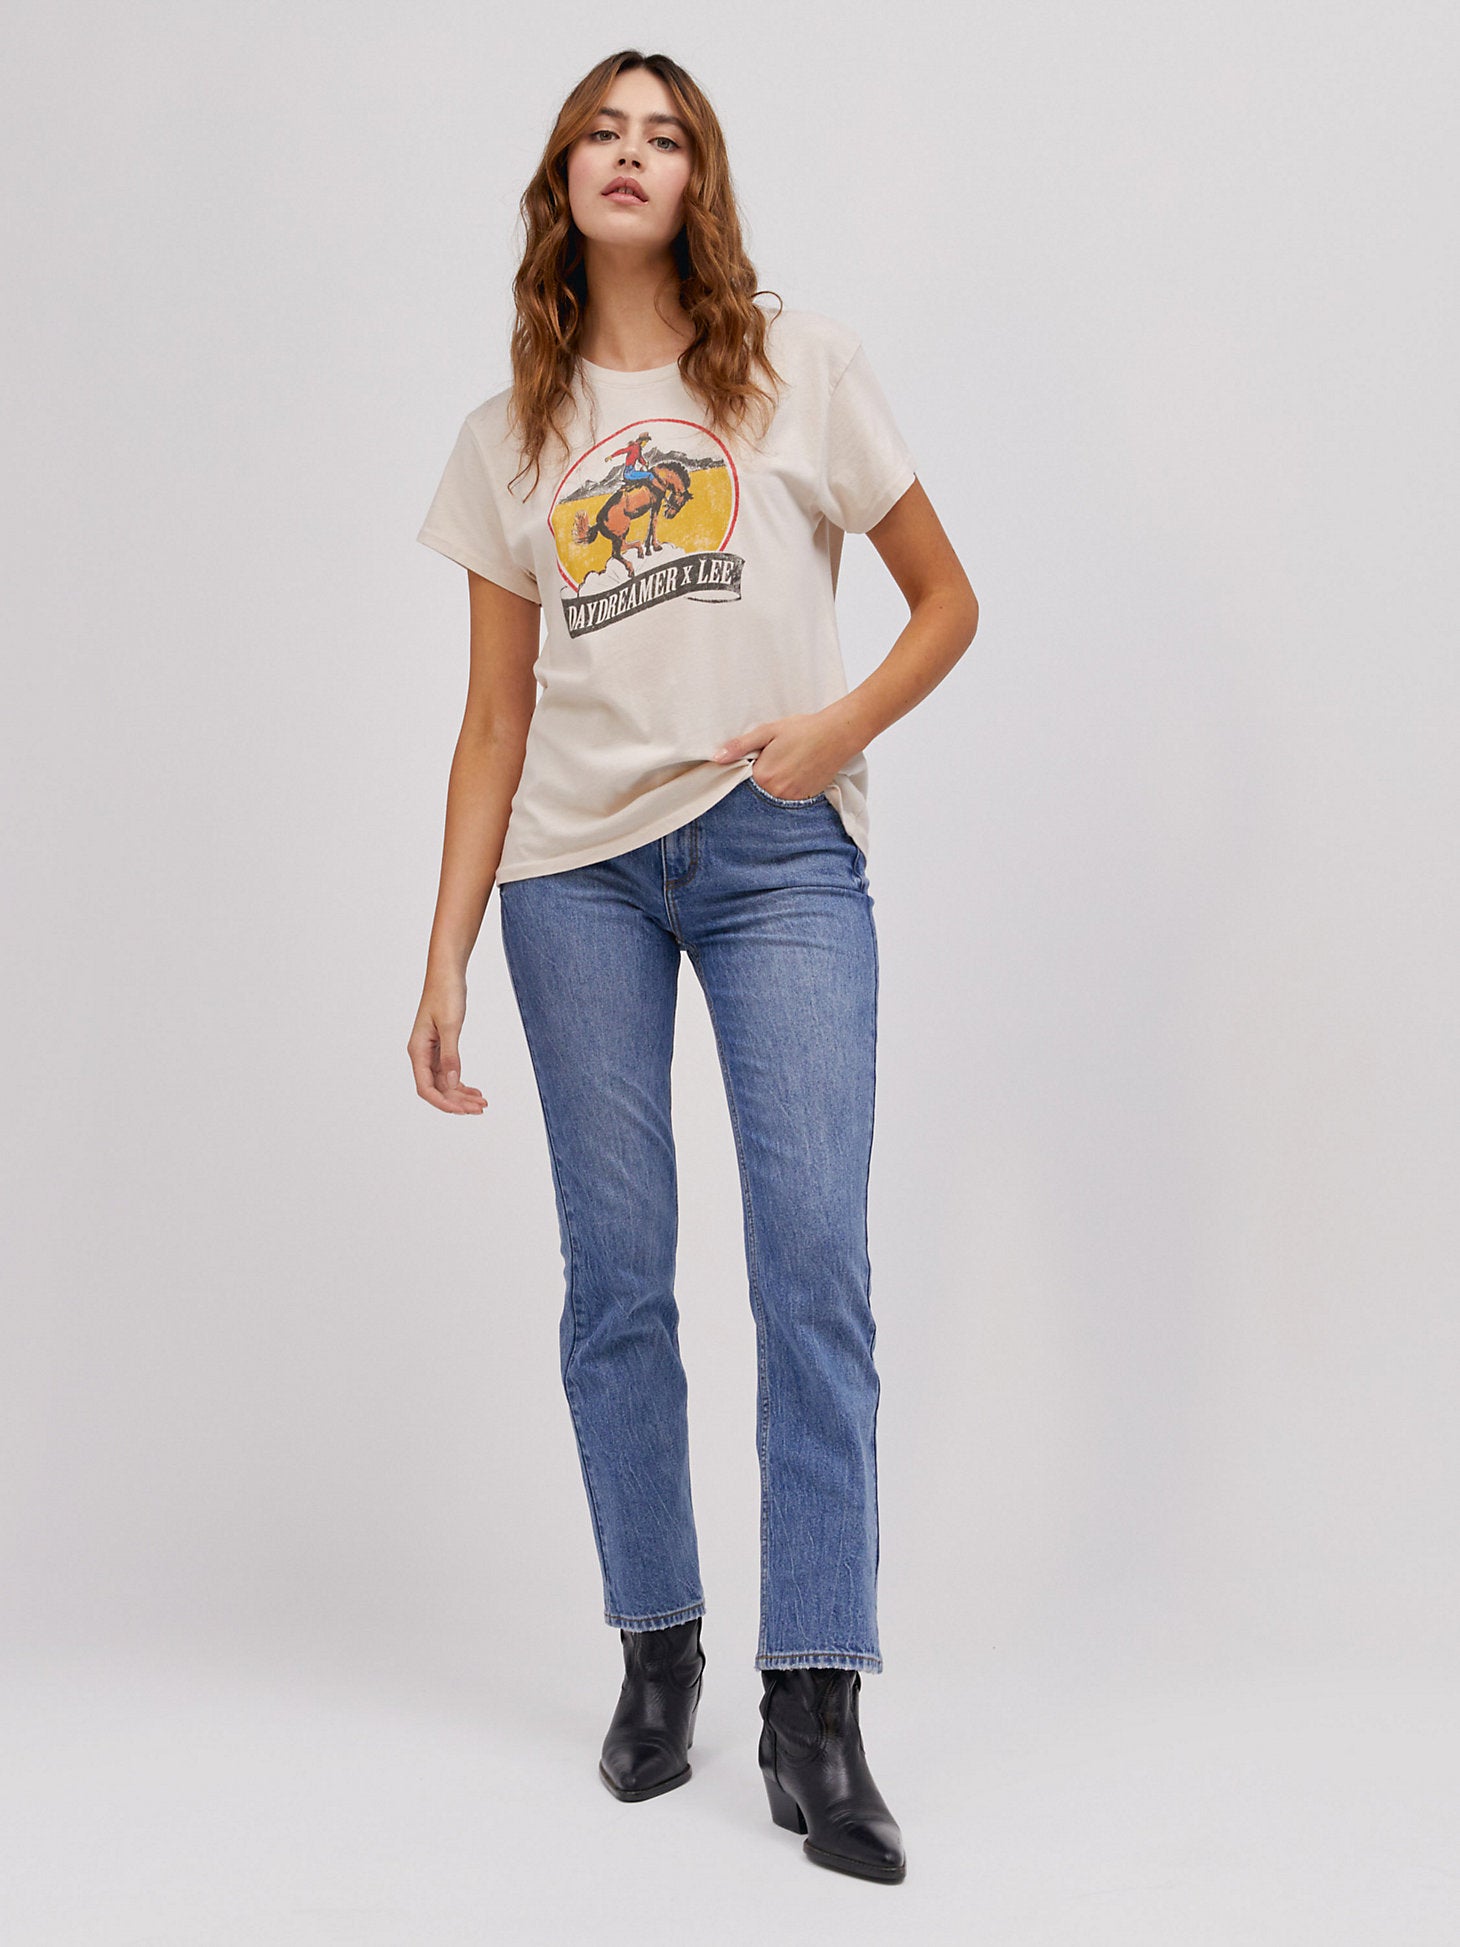 WOMEN'S LEE X DAYDREAMER WESTERN TOUR TEE IN DIRTY WHITE